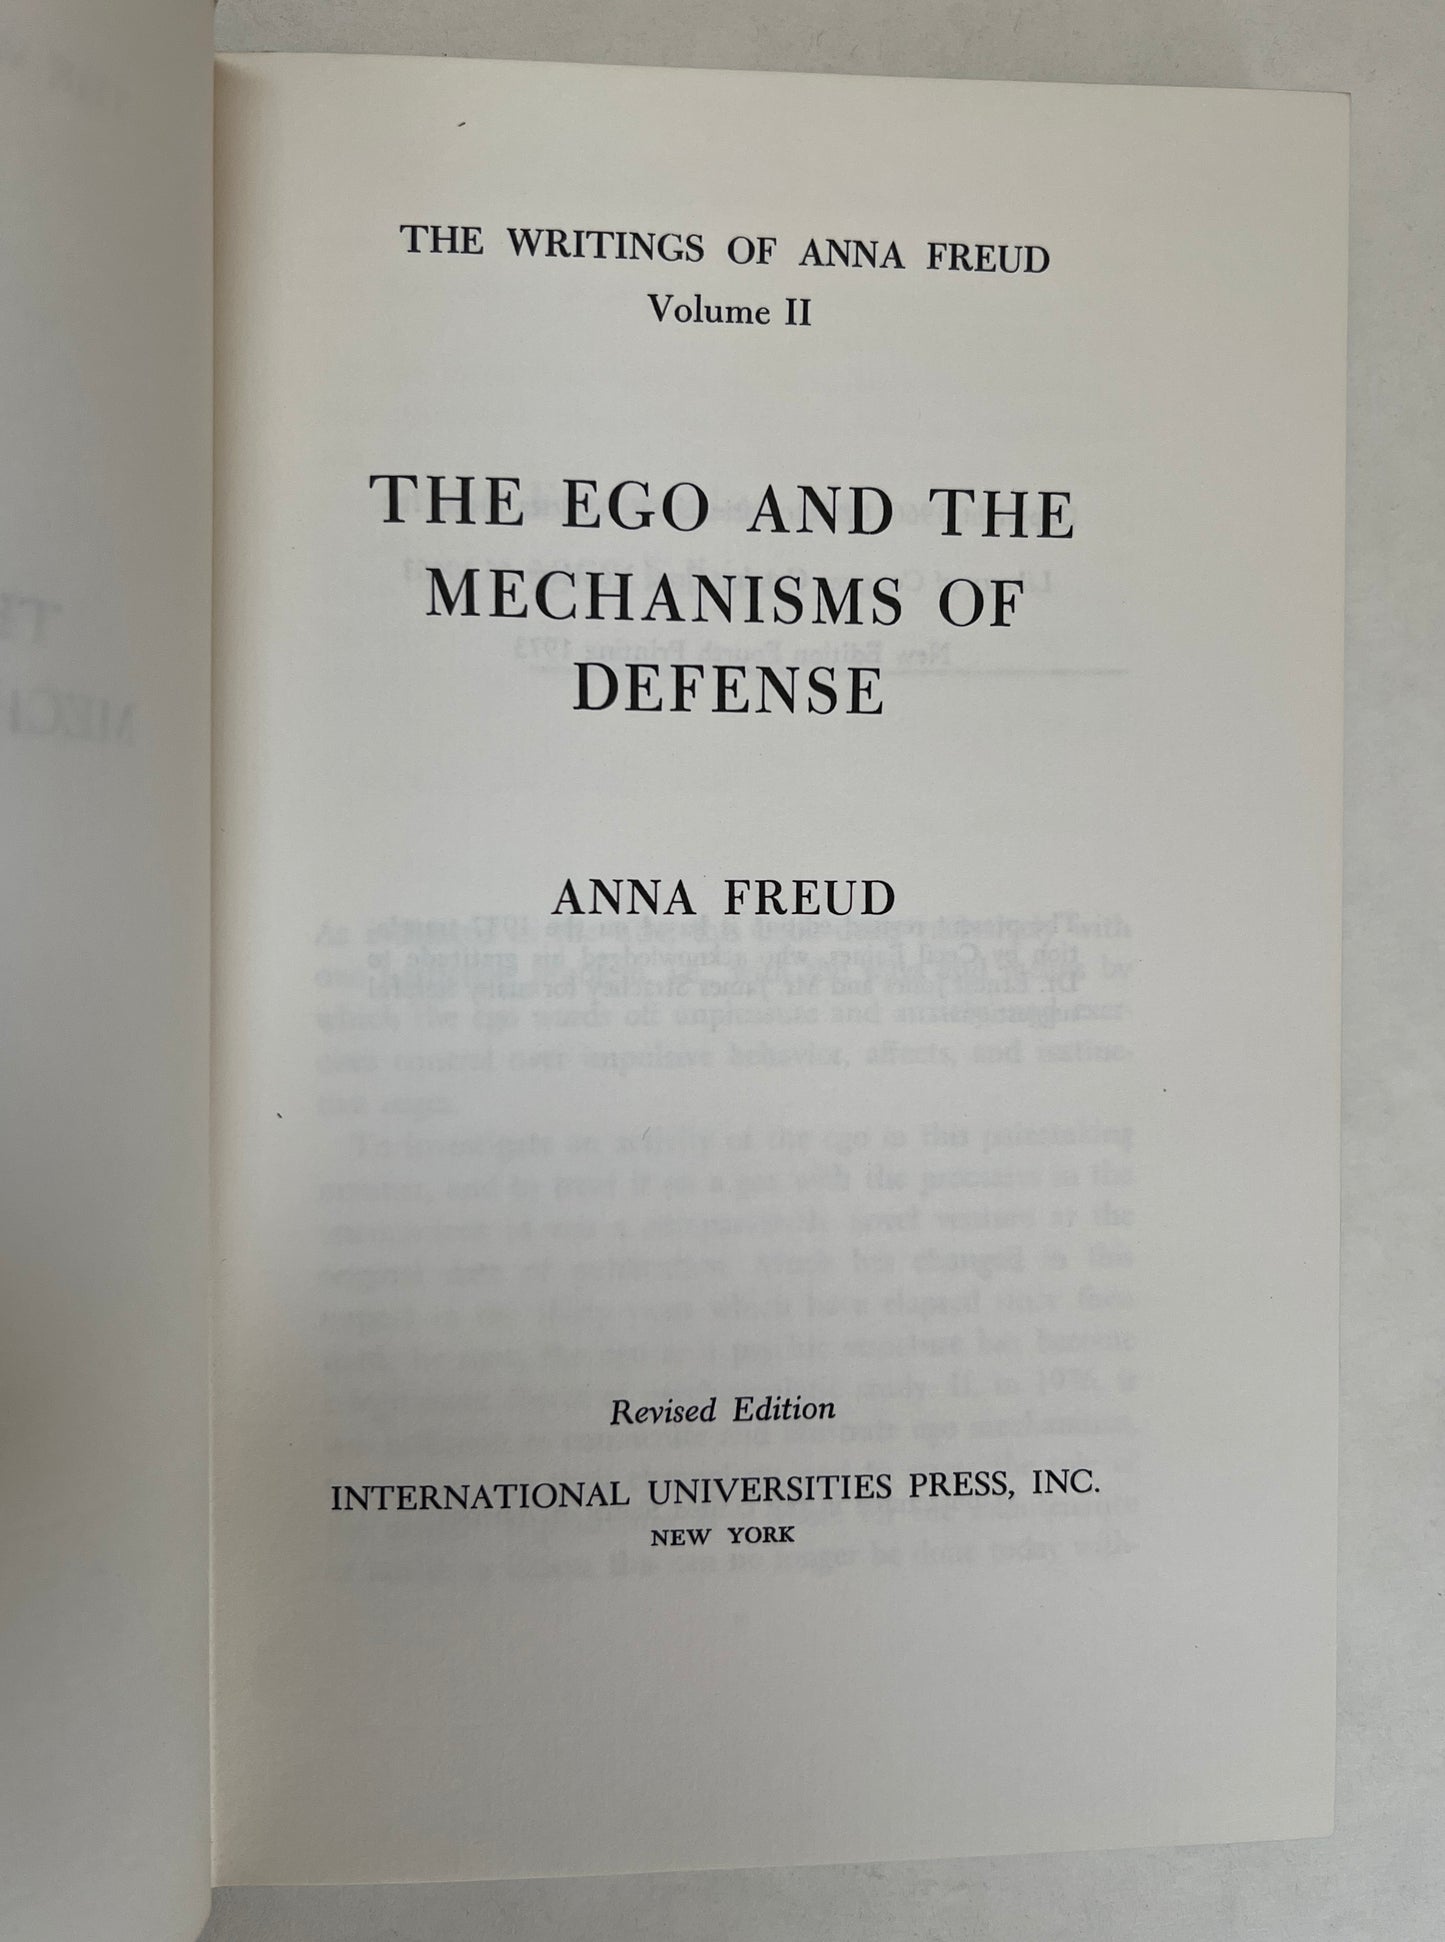 The Writings of Anna Freud, Volume II 1936: the Ego and the Mechanisms of Defense